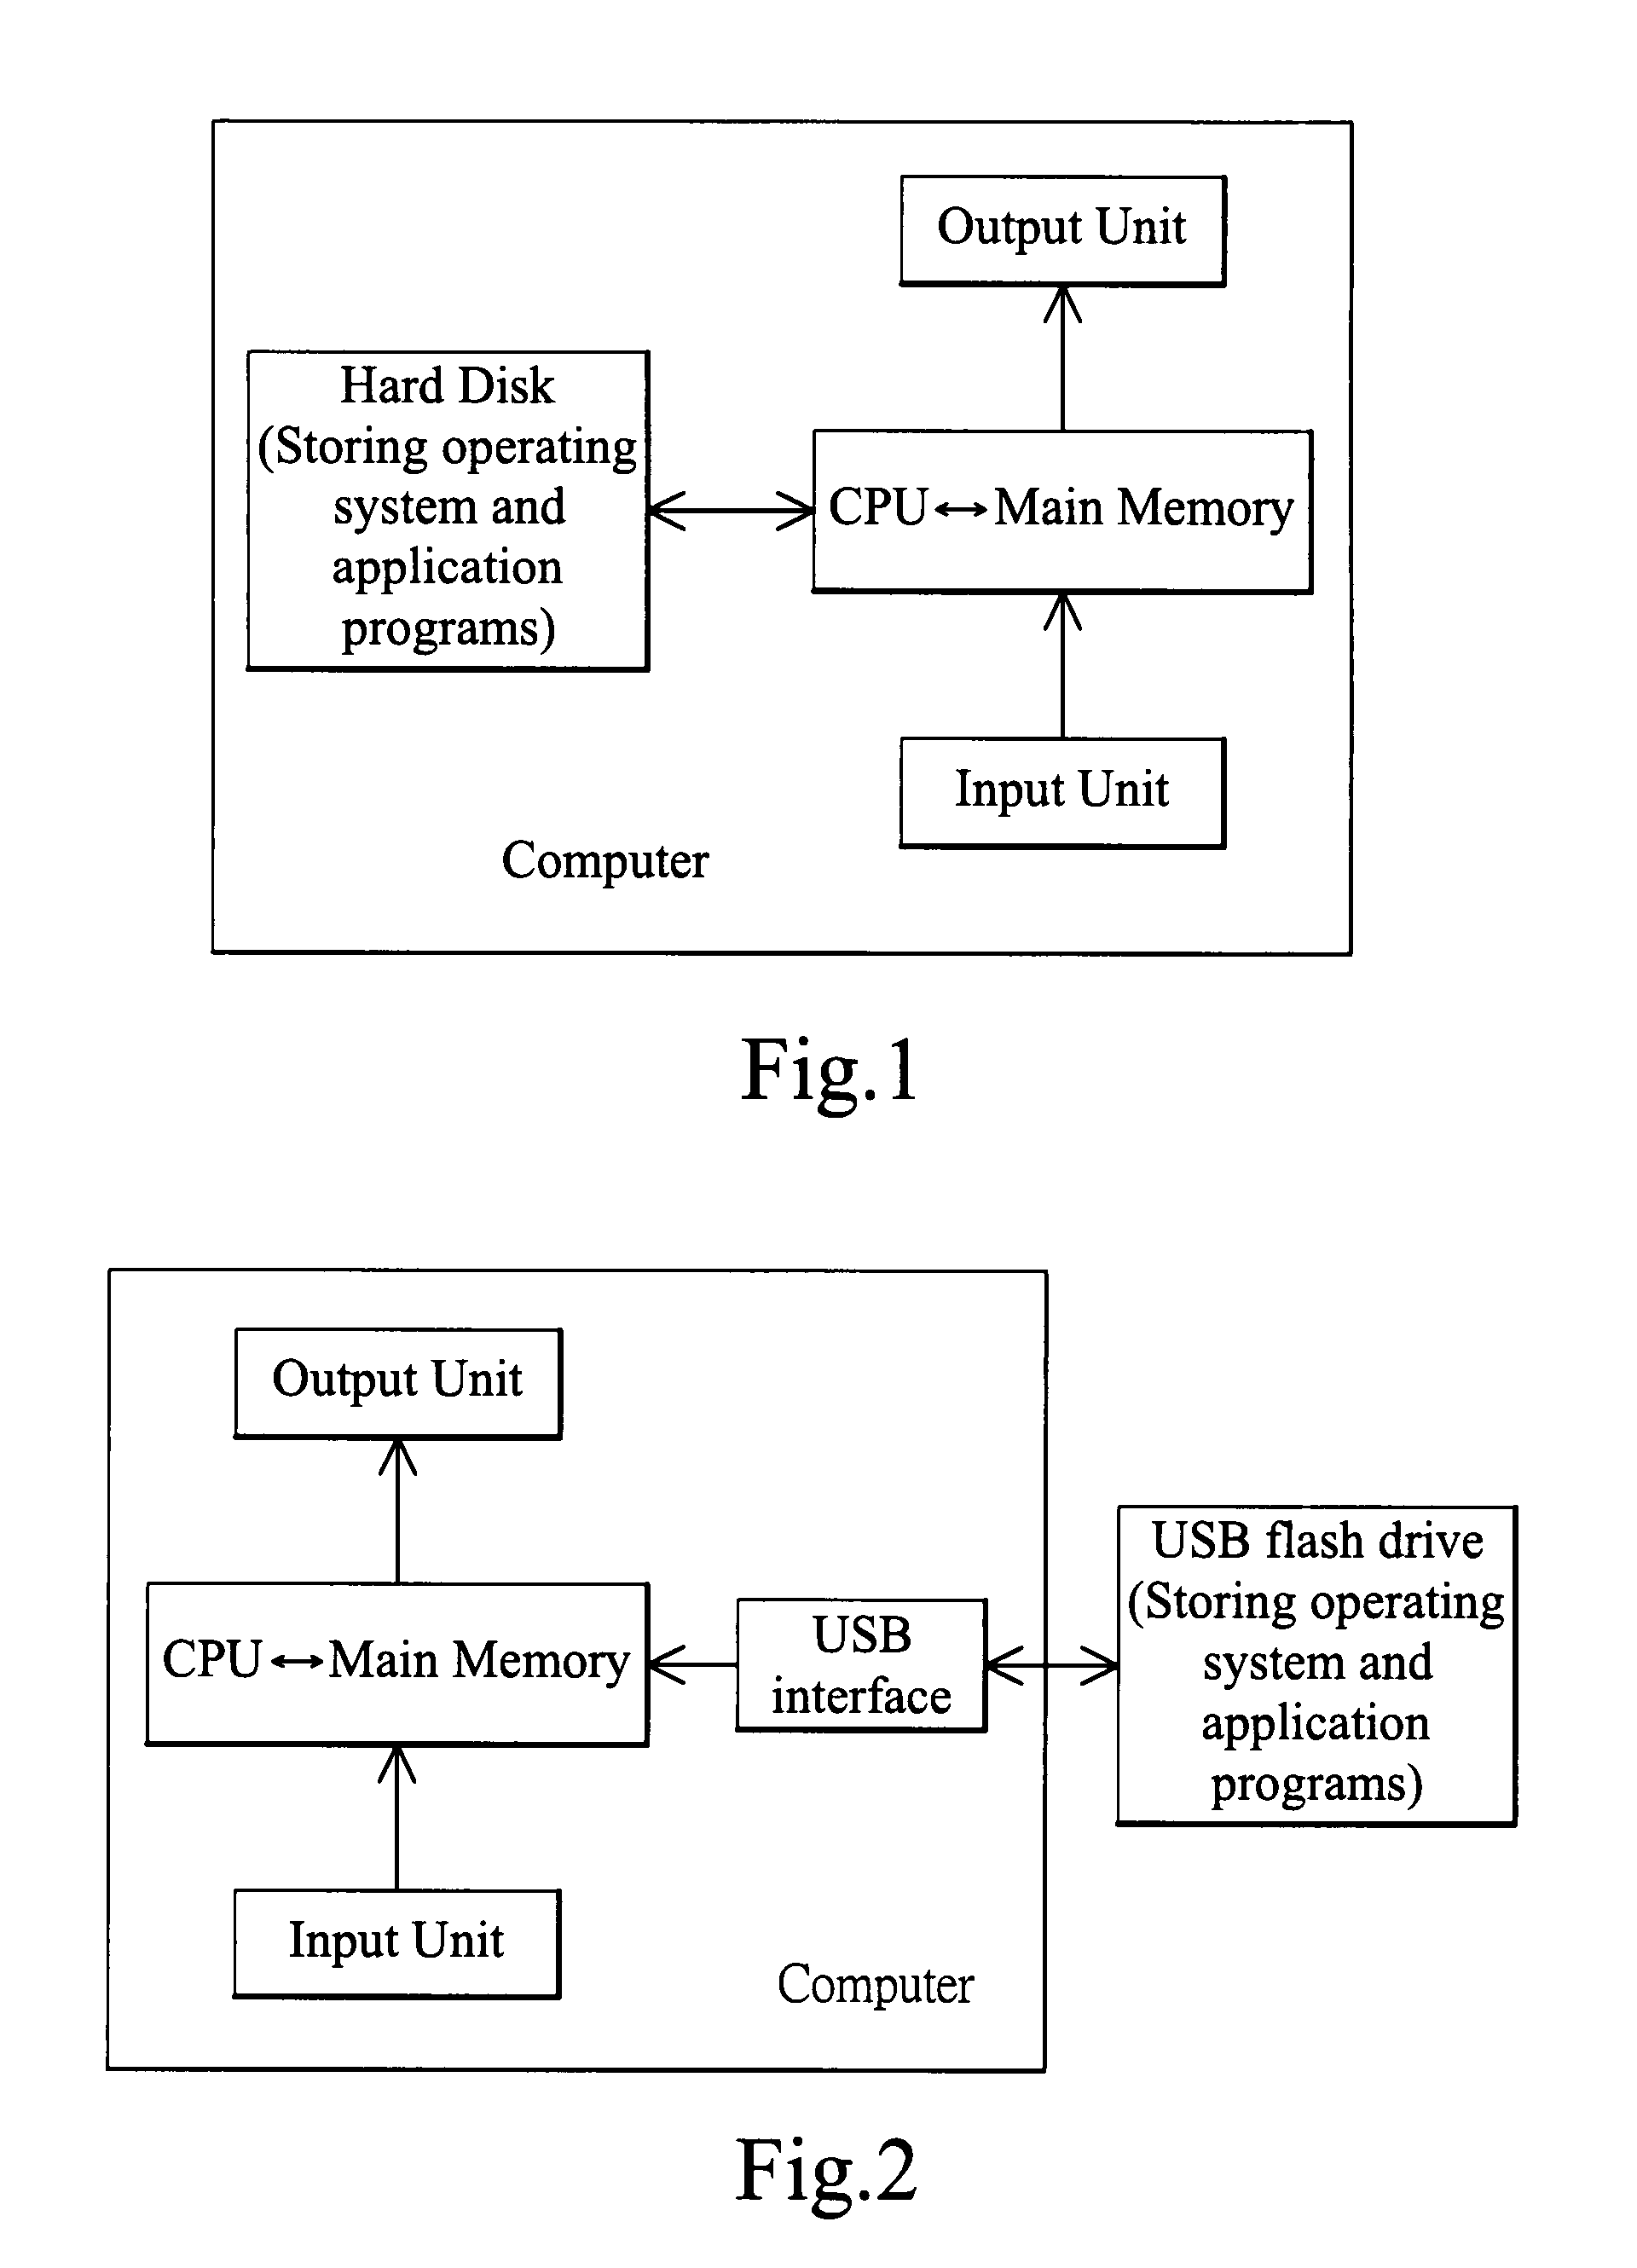 Universal serial bus flash drive for booting computer and method for loading programs to the flash drive